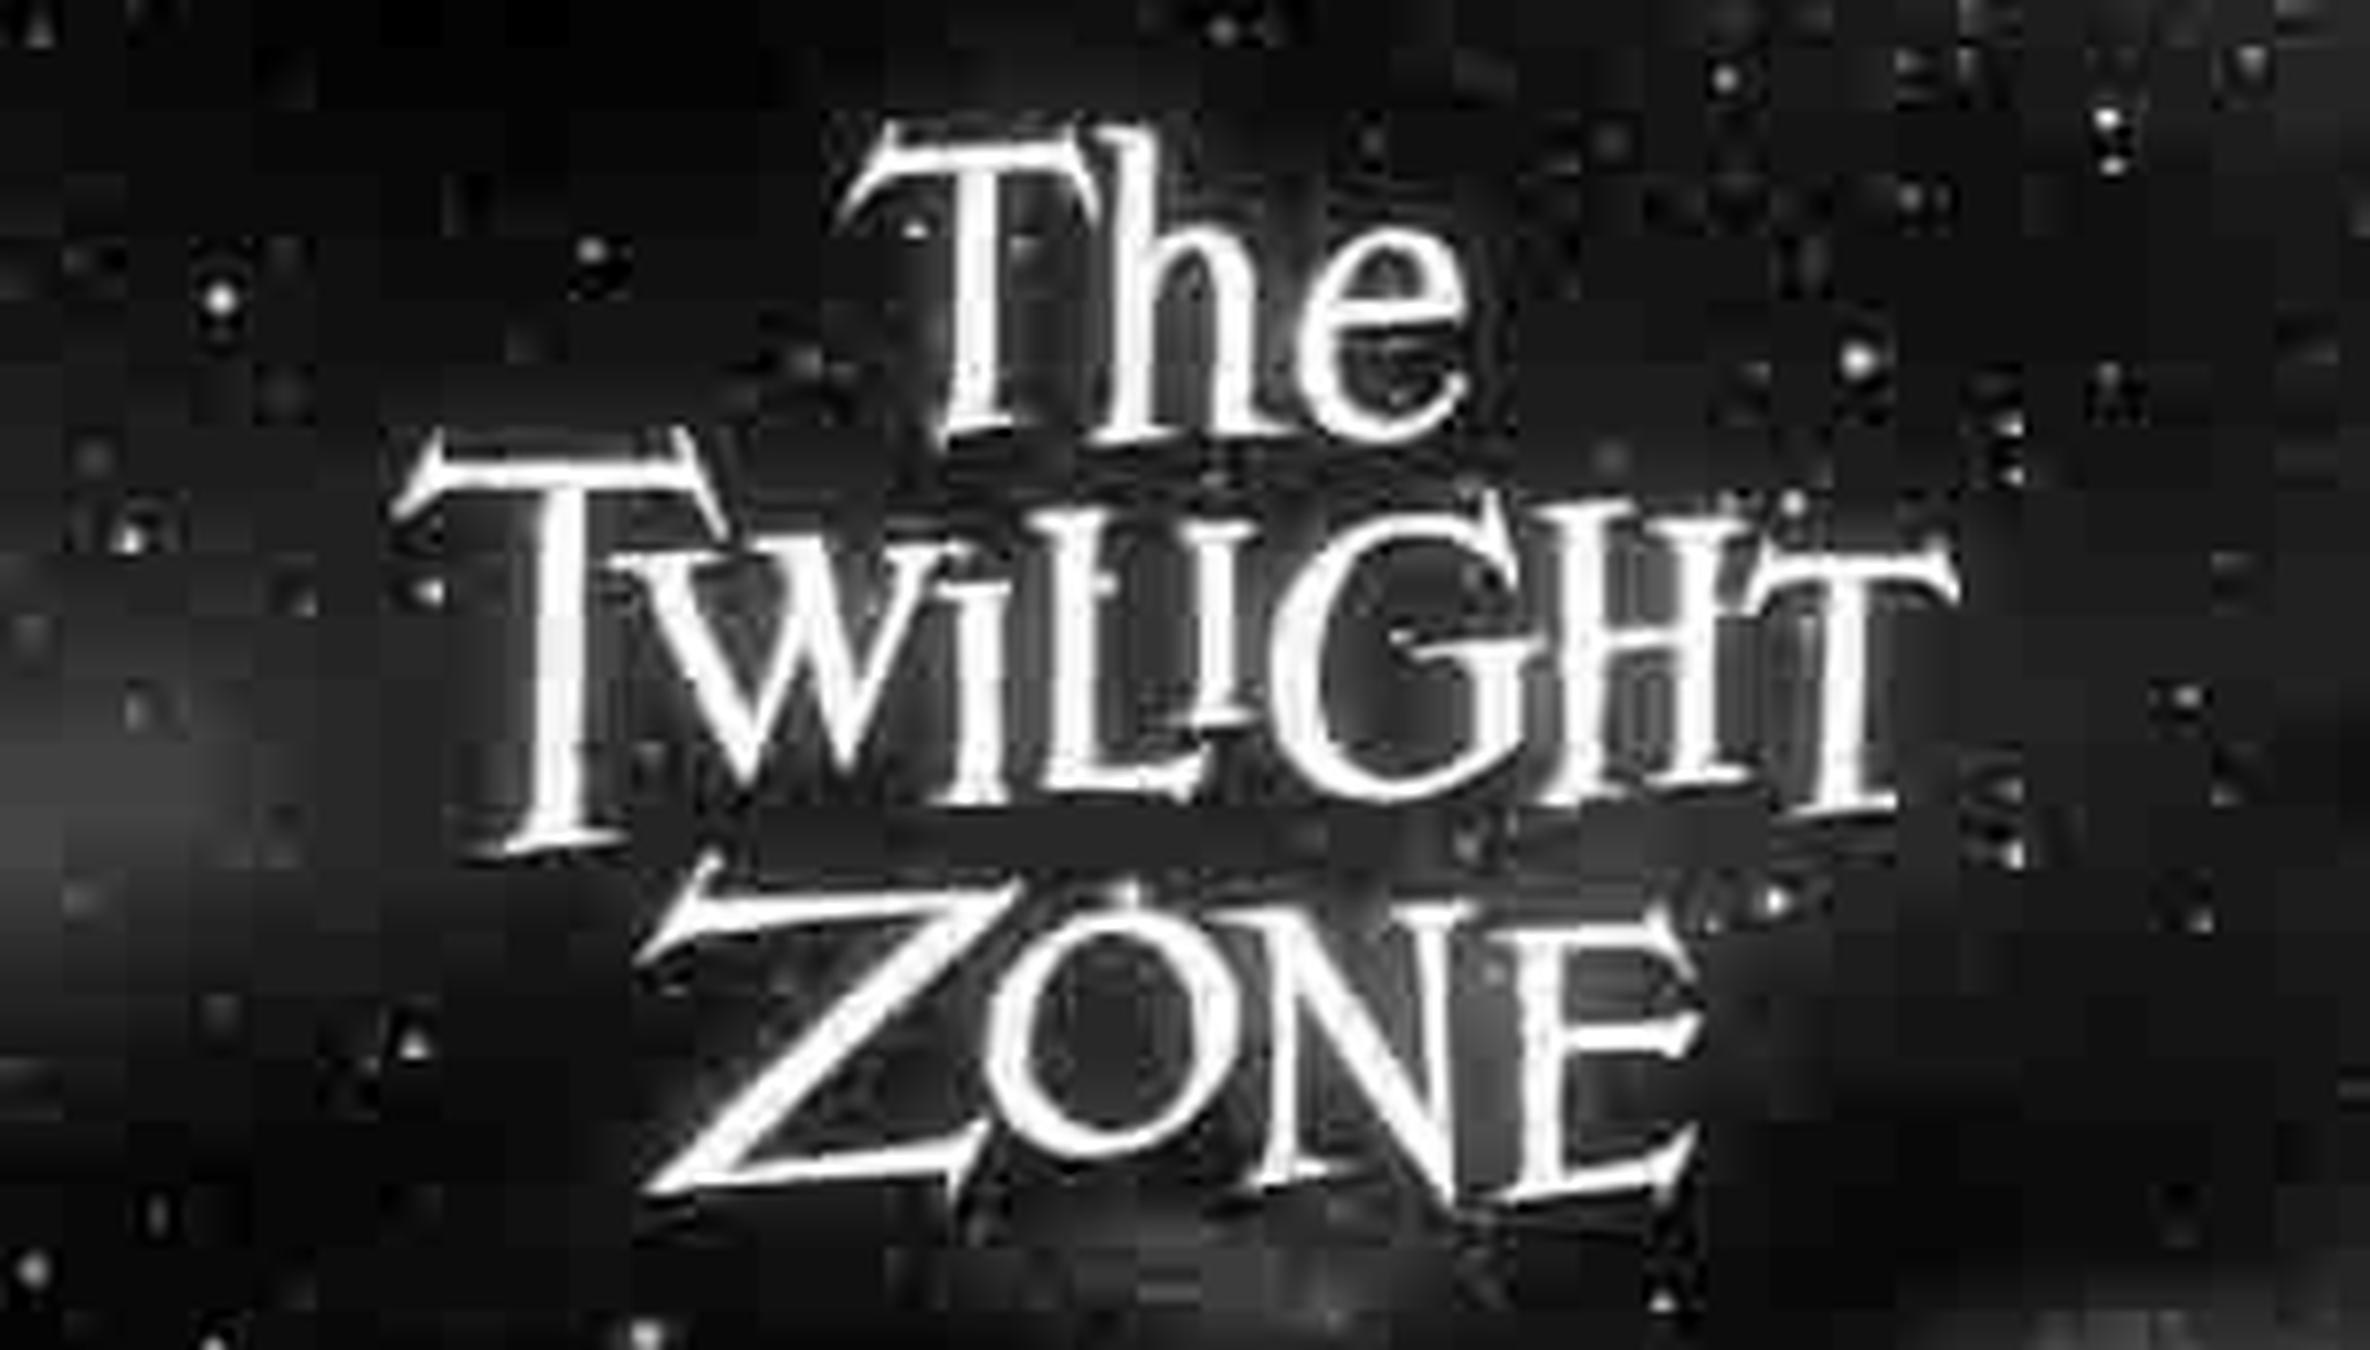 After 50 Years, 'The Twilight Zone' Still Knows What Scares Us